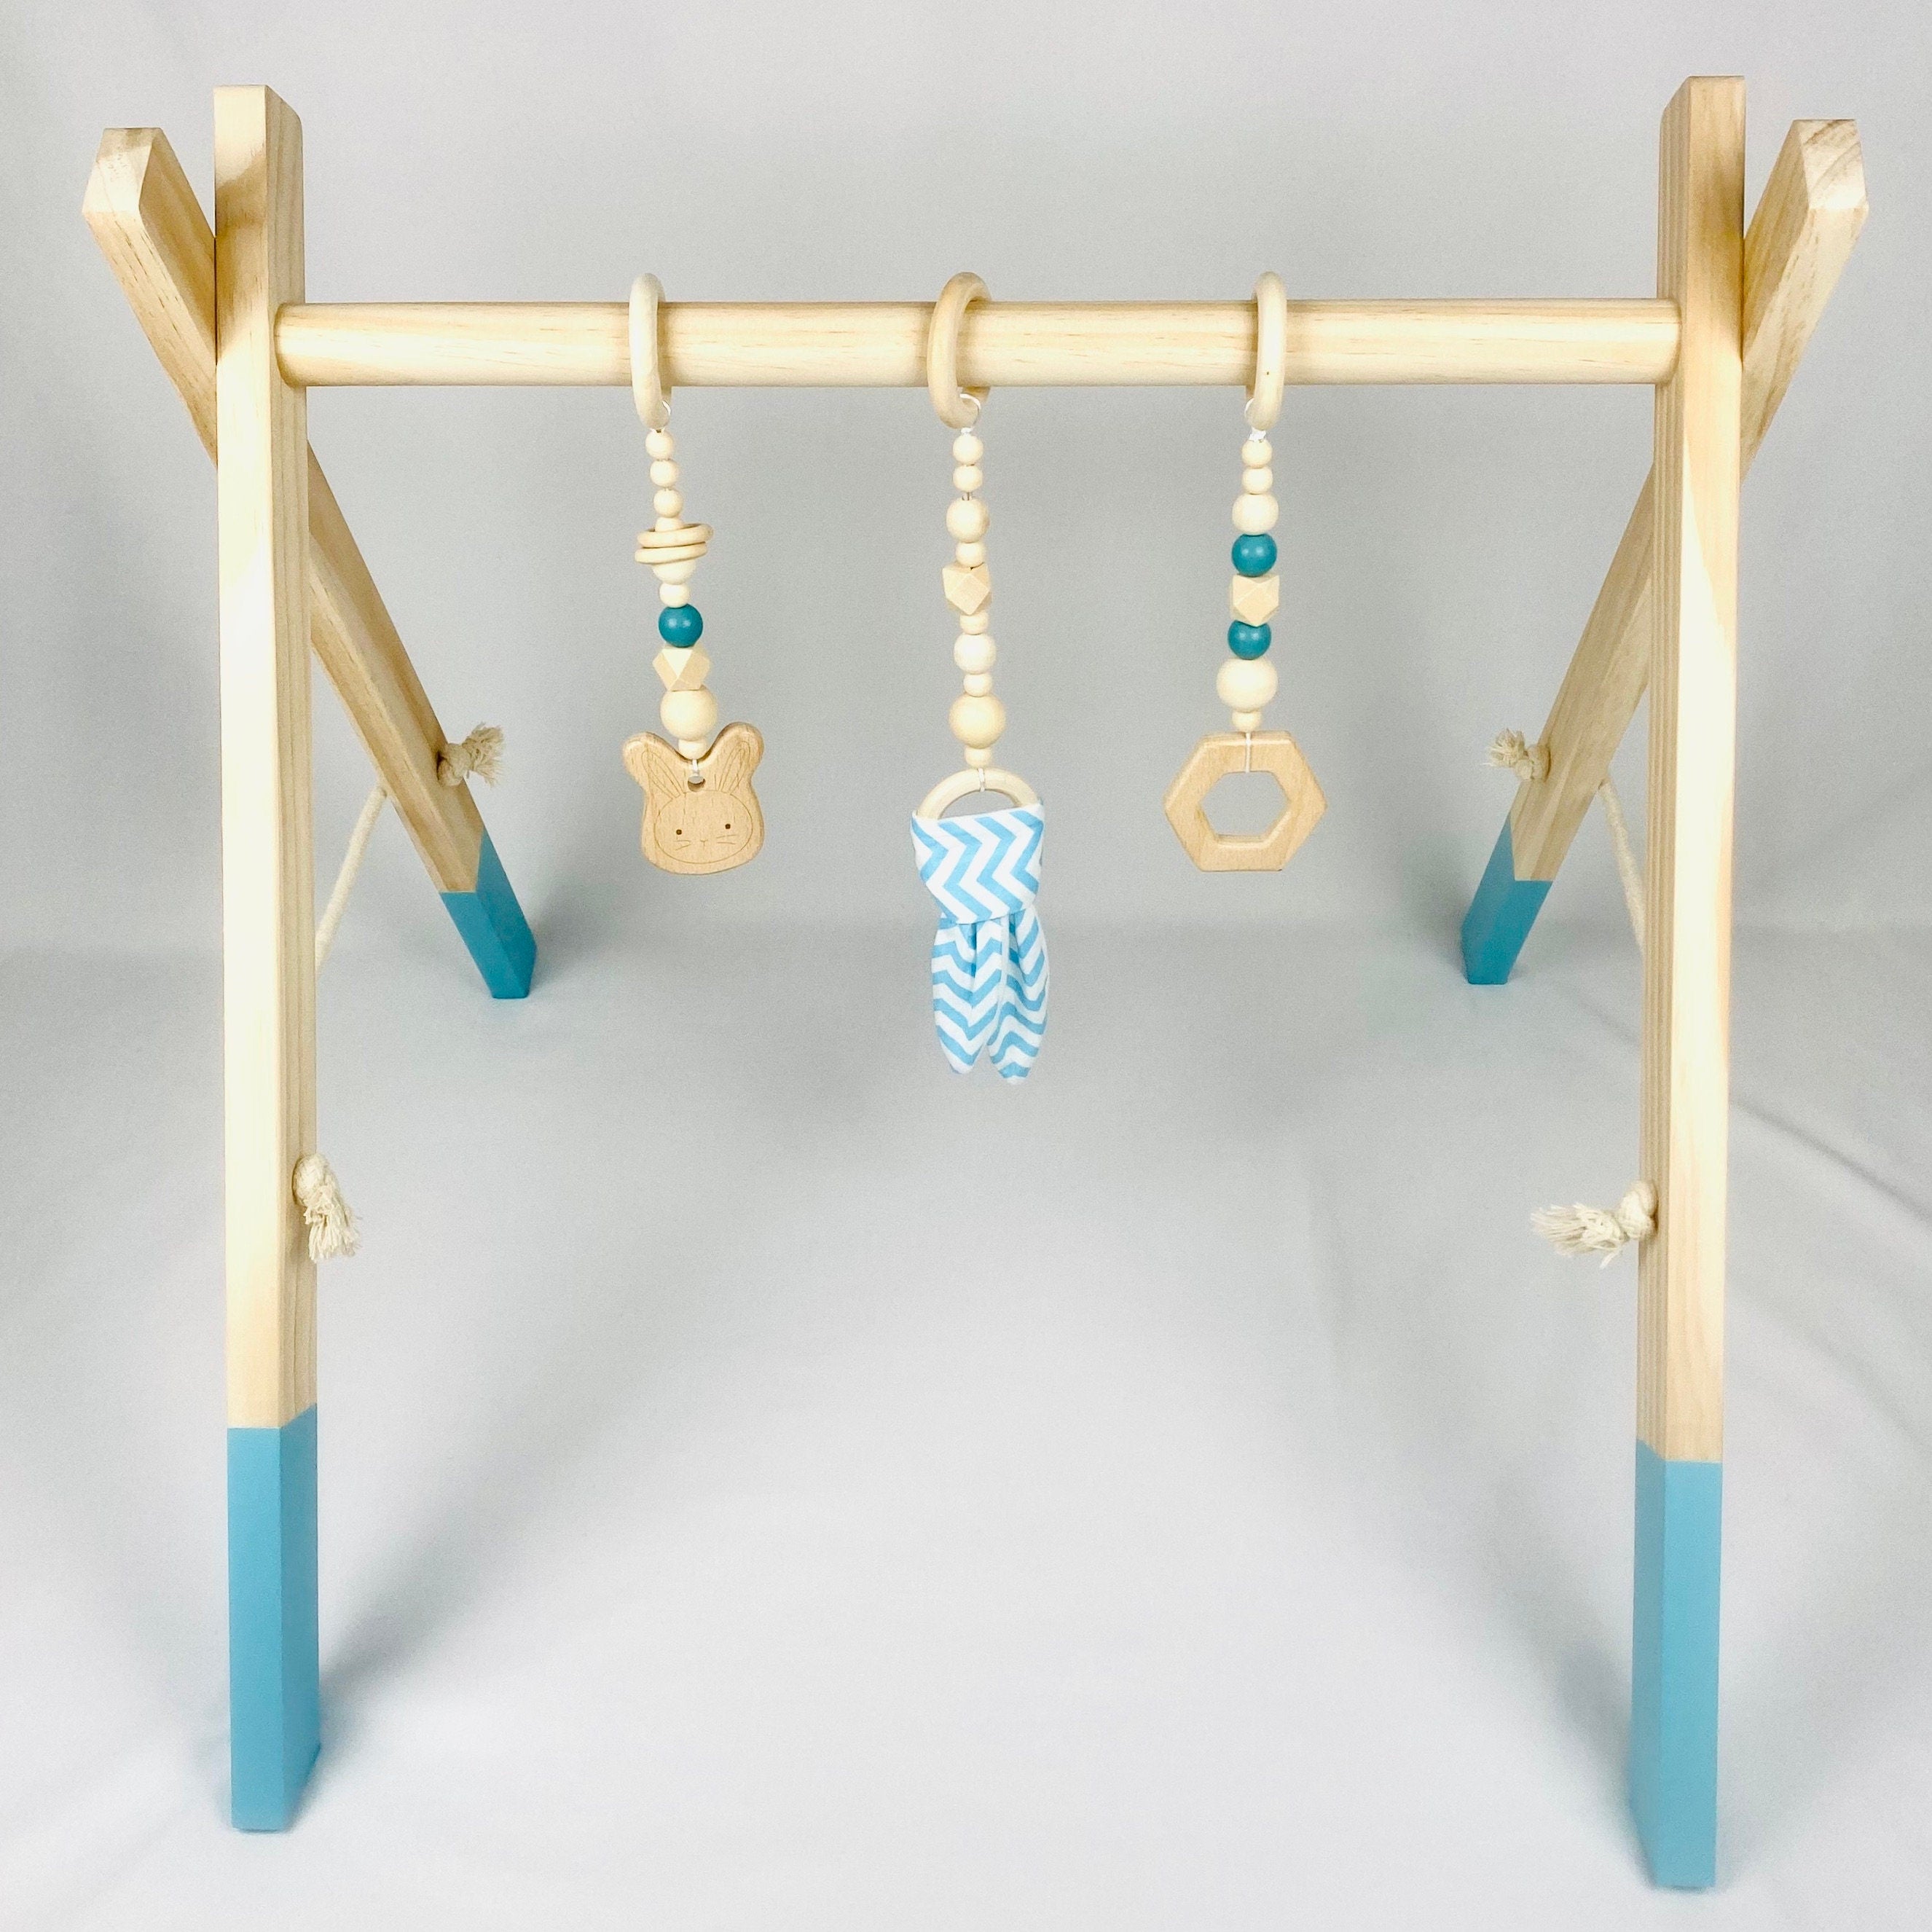 Wooden Baby Play Gym with Black Hanging Toys